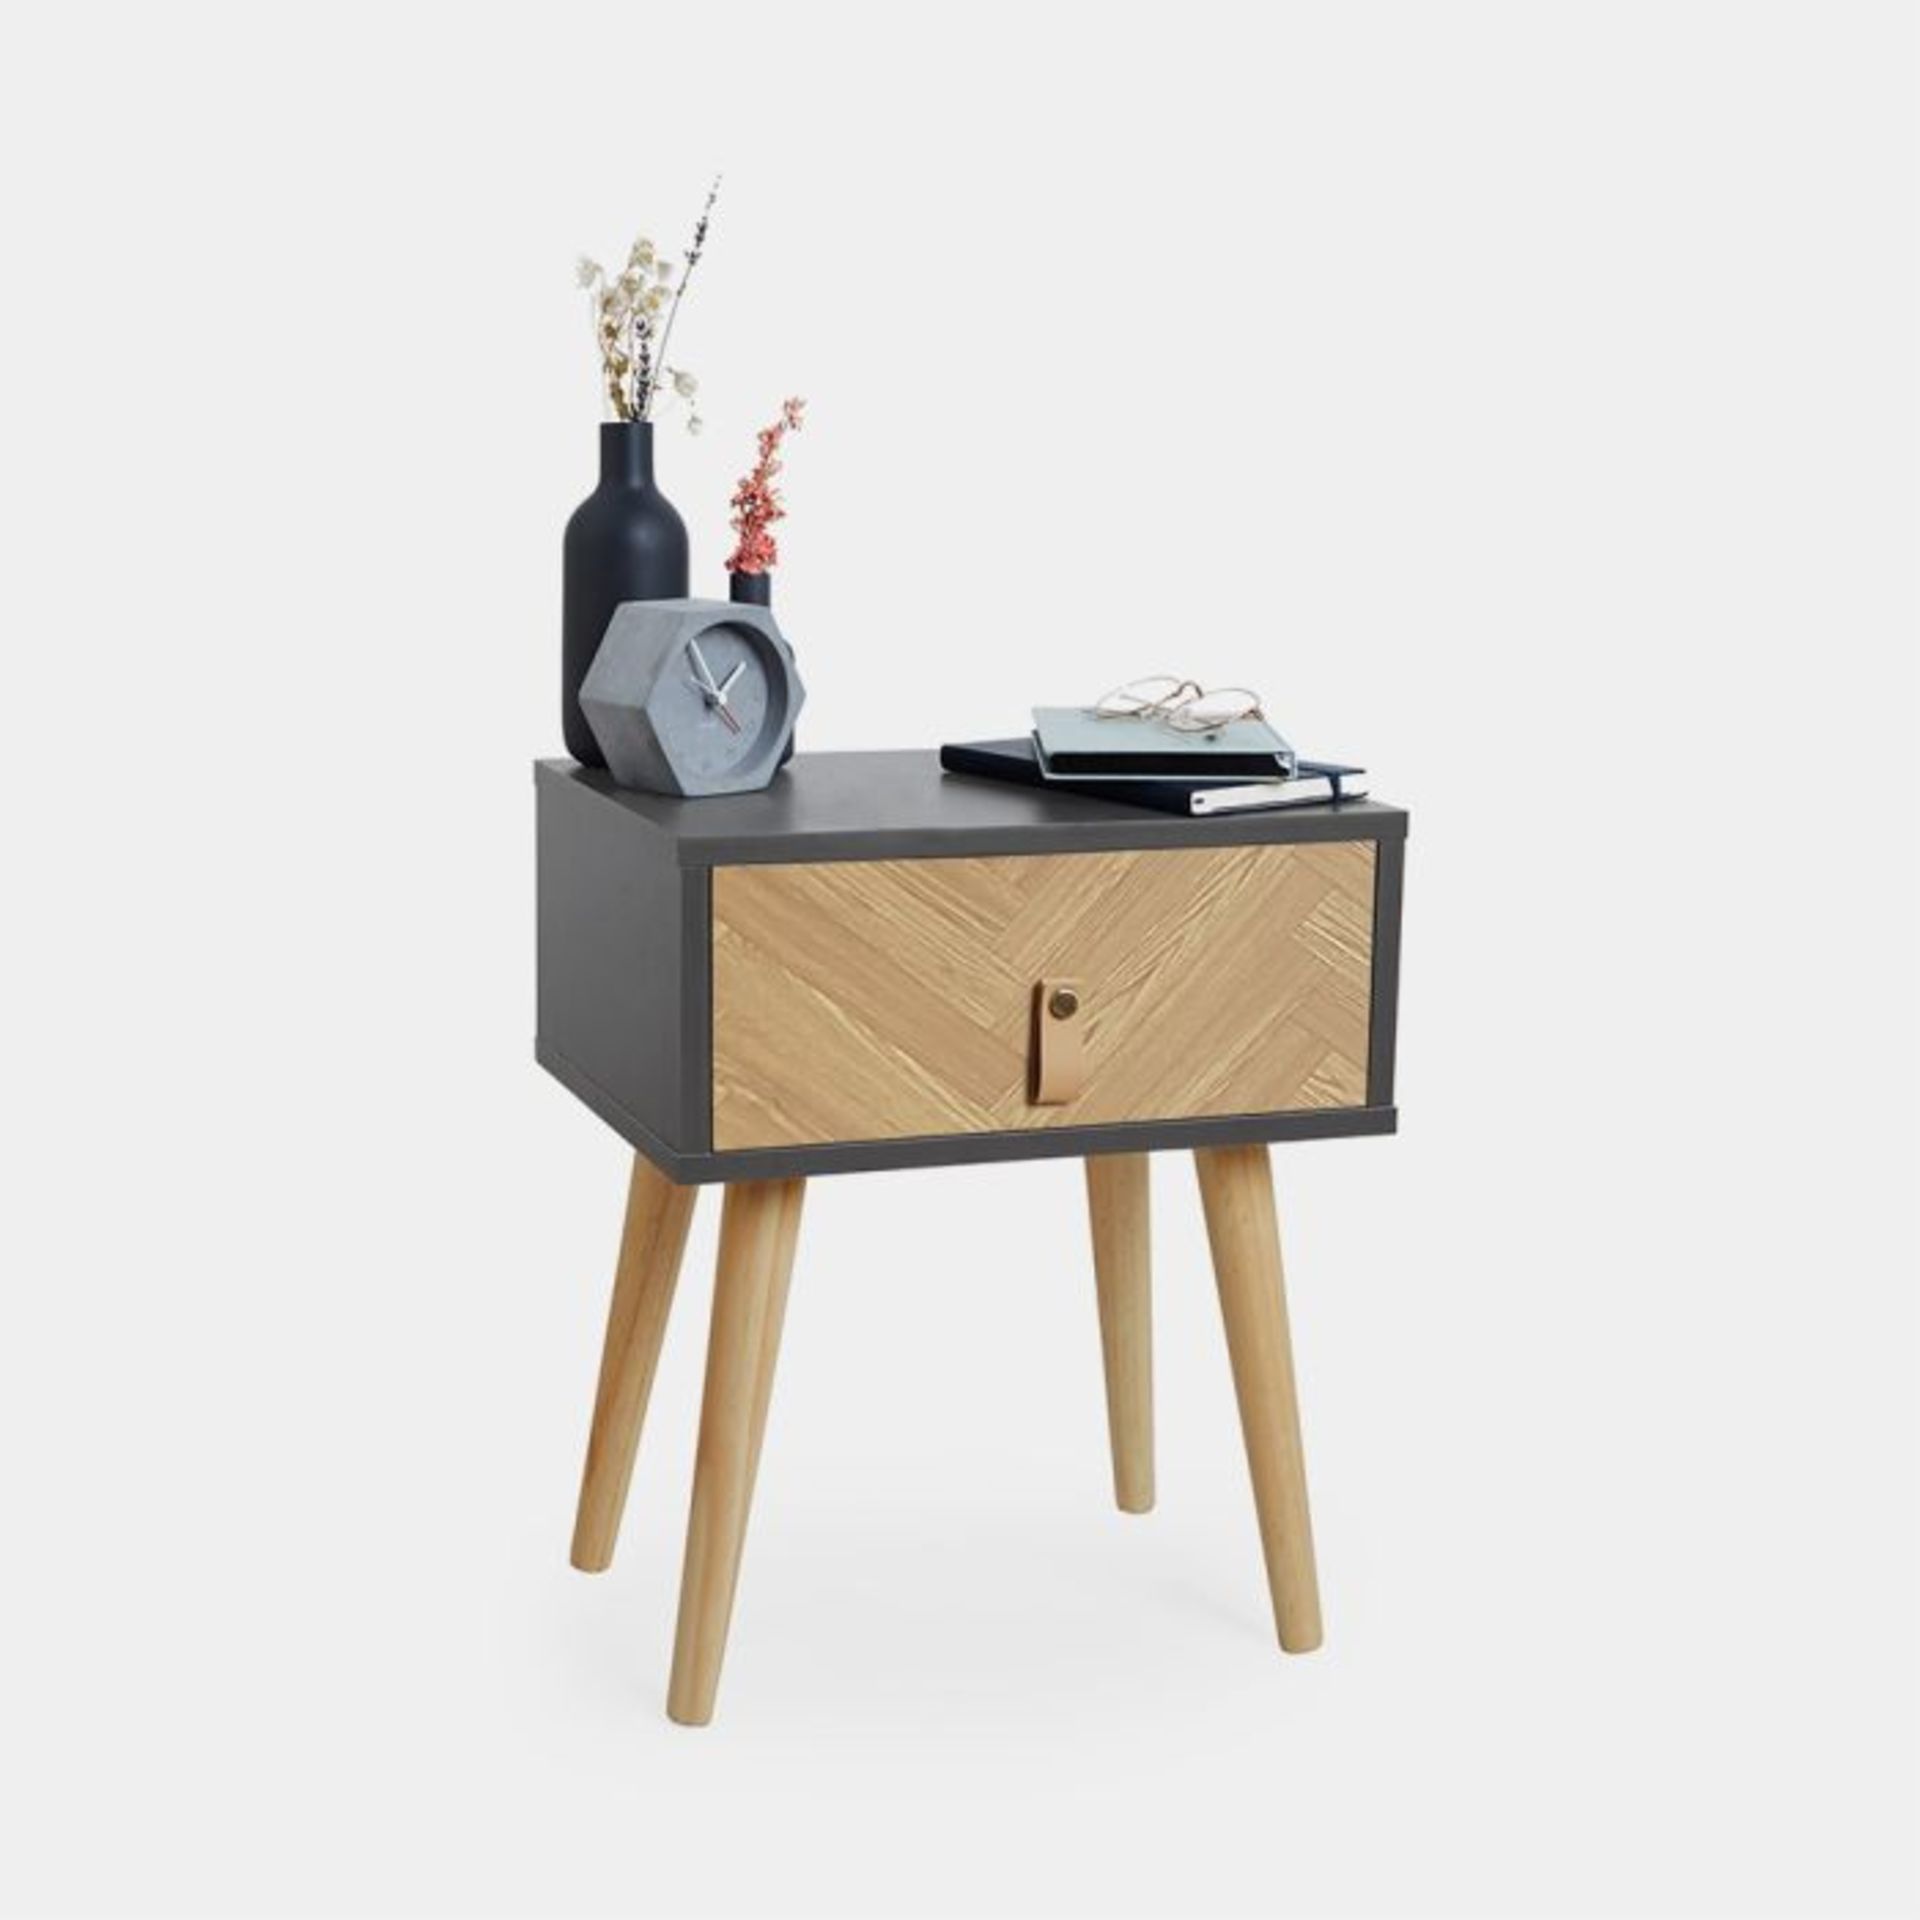 Herringbone Bedside Table. - ER43. The grey and natural wood colour combo will suit any aesthetic,